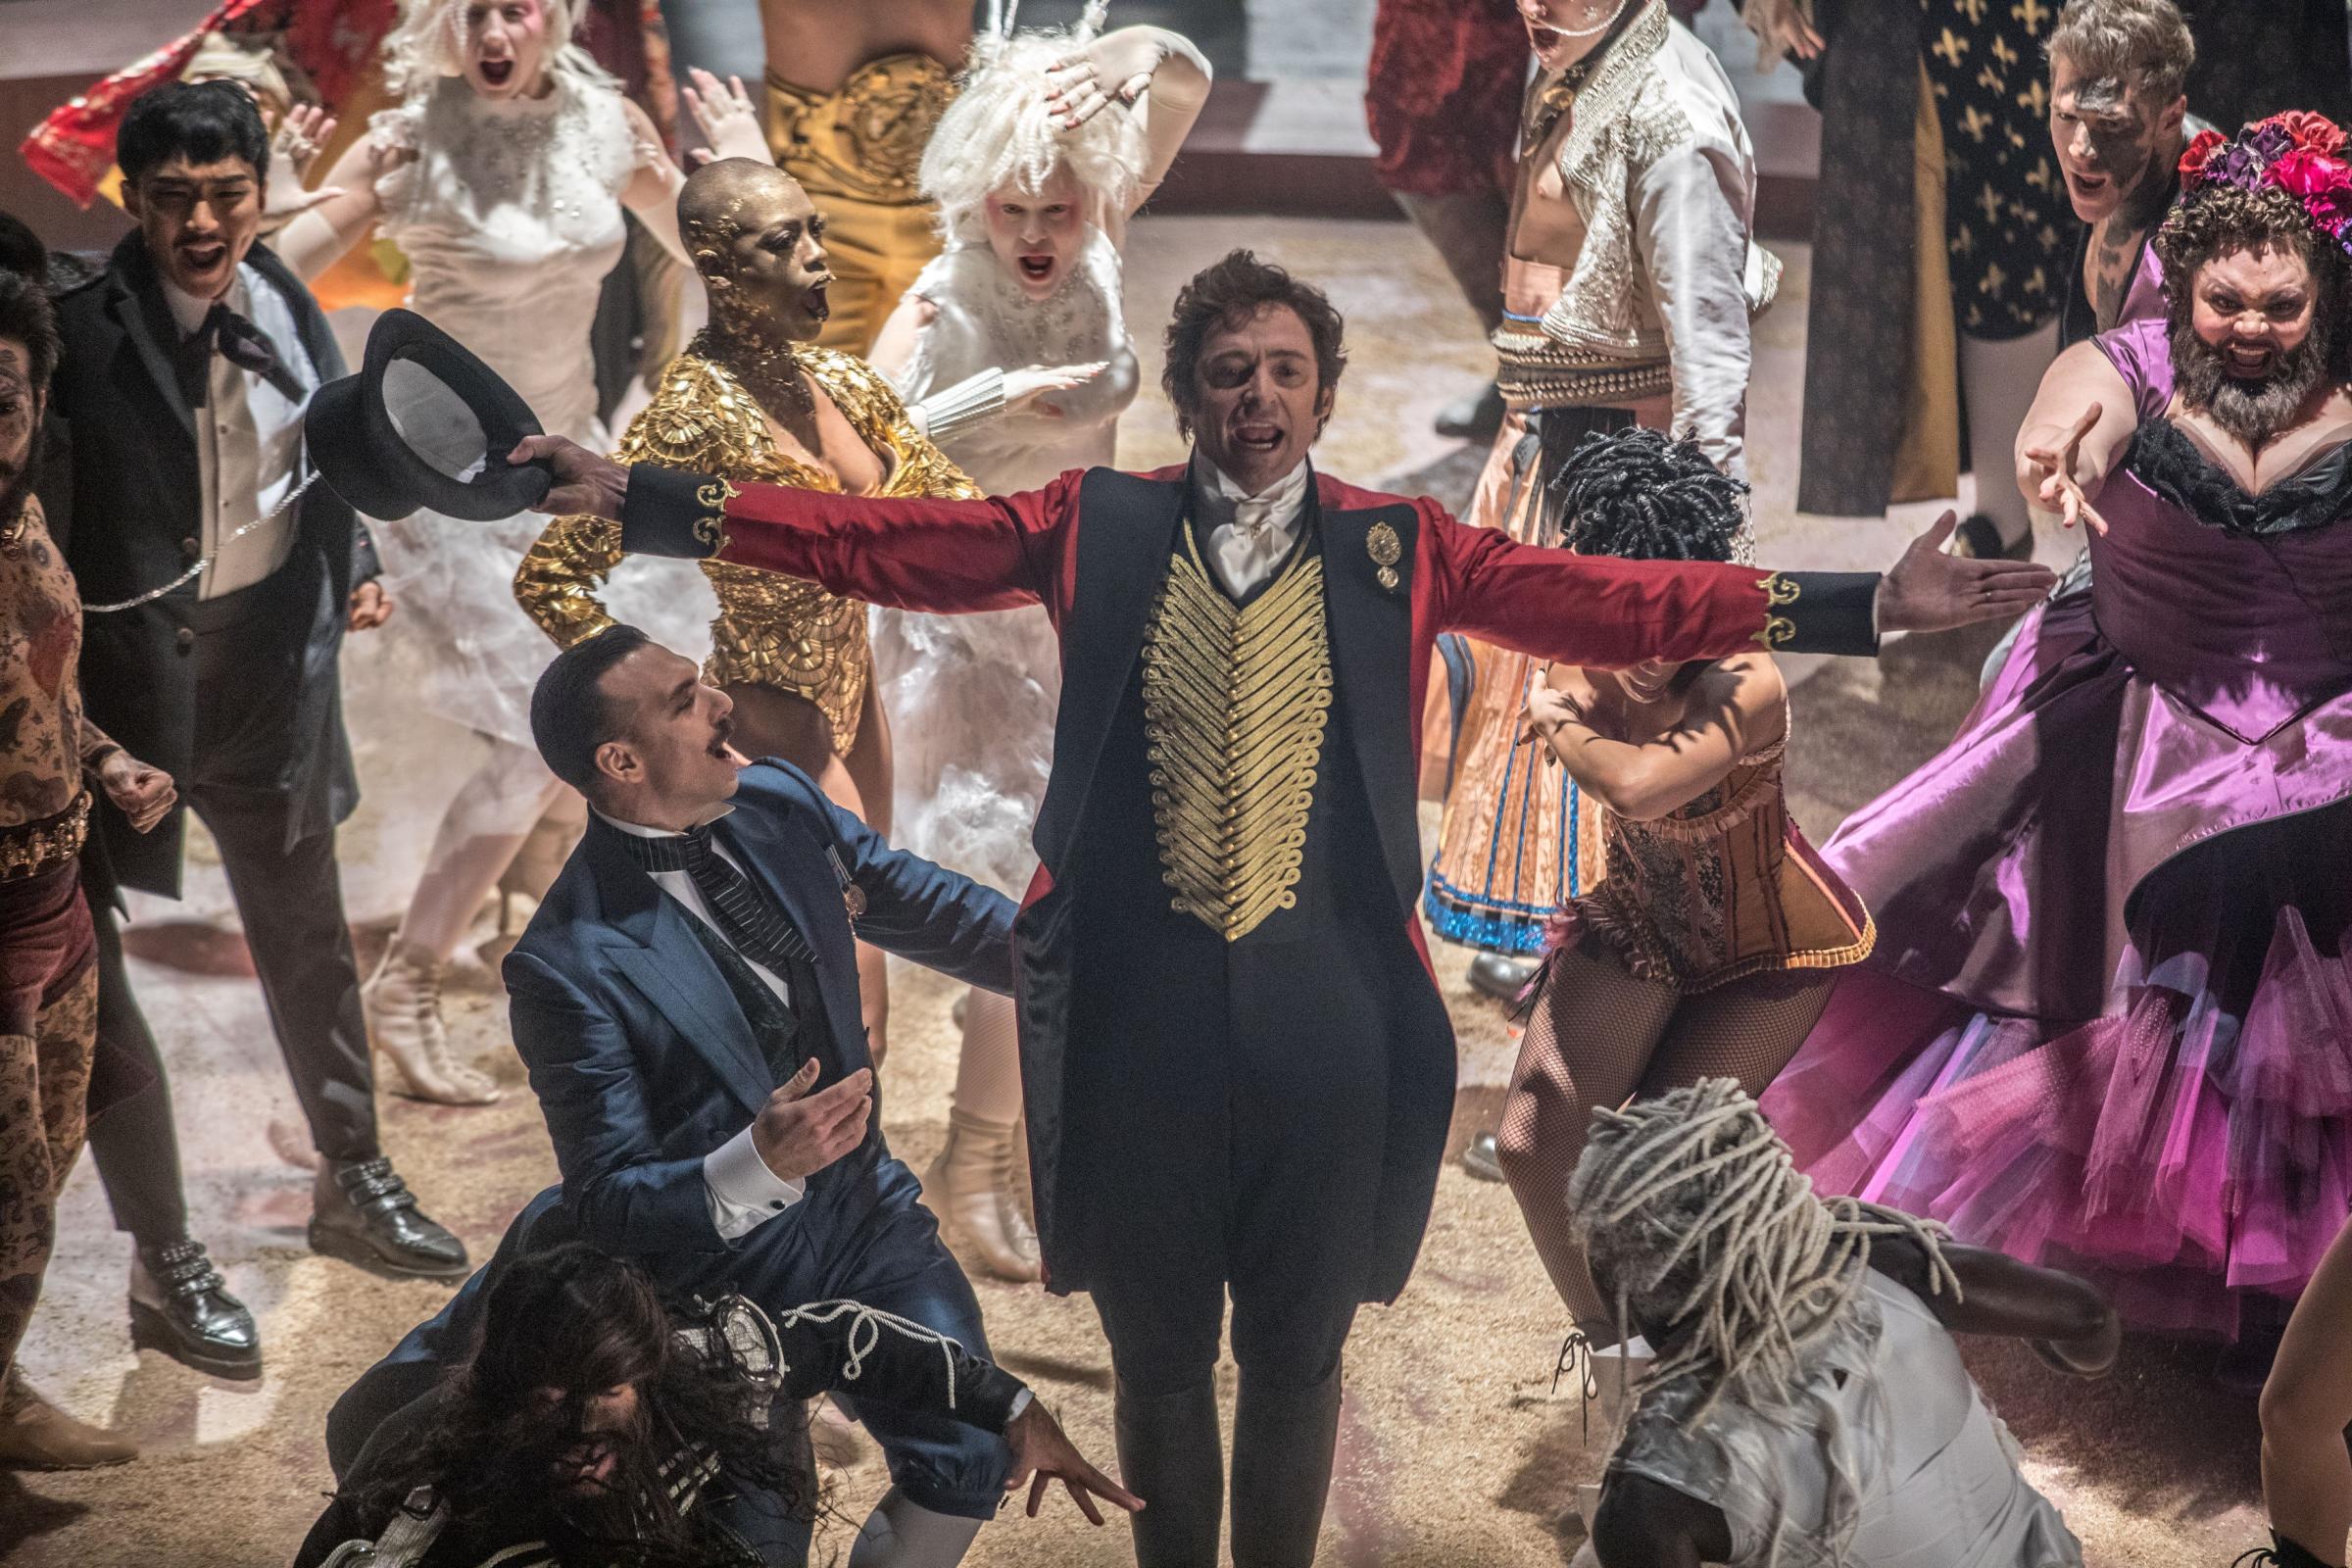 The Greatest Showman soundtrack on course to return to number one